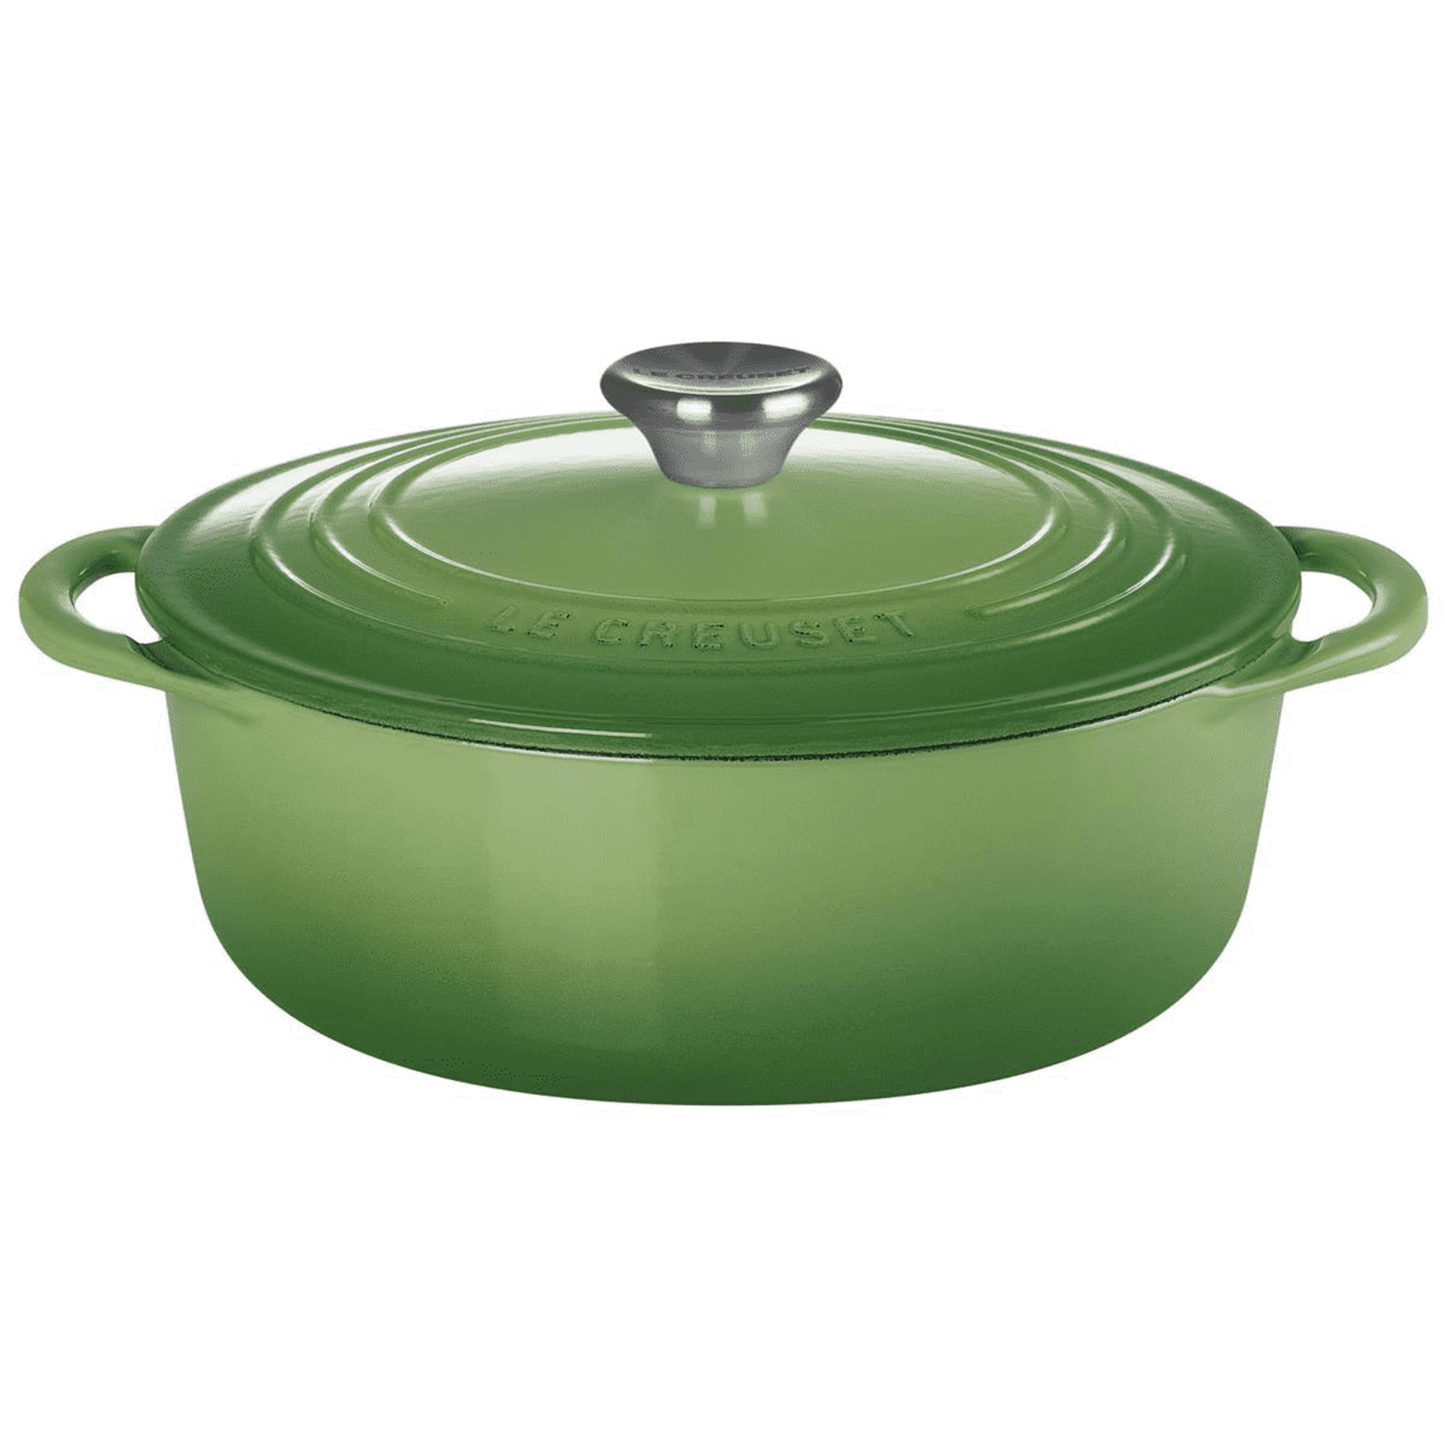 an ombre green casserole dish with matching lid and a stainless steel knob